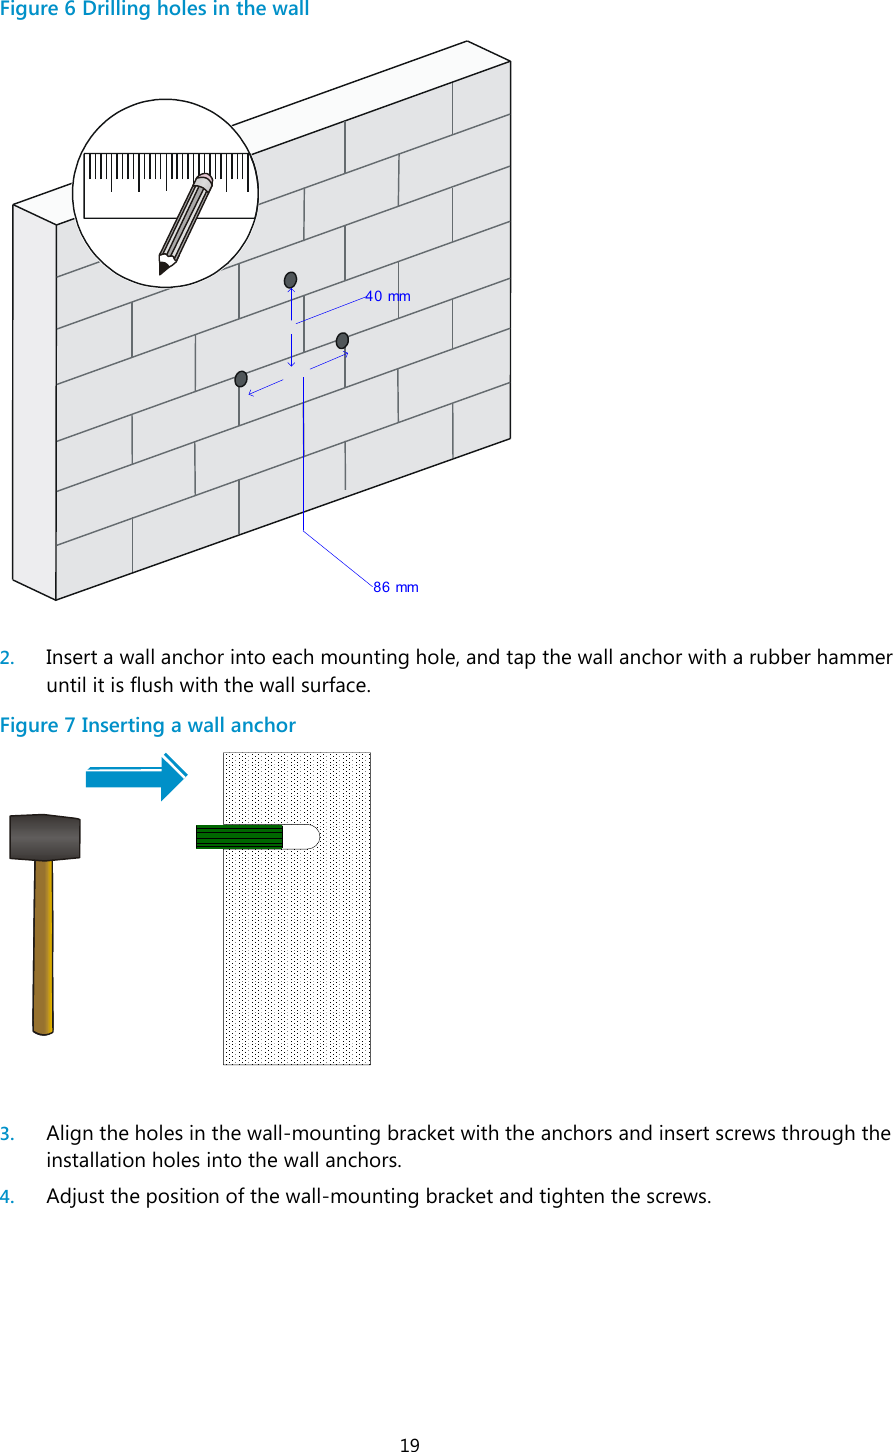  19 Figure 6 Drilling holes in the wall   2. Insert a wall anchor into each mounting hole, and tap the wall anchor with a rubber hammer until it is flush with the wall surface. Figure 7 Inserting a wall anchor   3. Align the holes in the wall-mounting bracket with the anchors and insert screws through the installation holes into the wall anchors. 4. Adjust the position of the wall-mounting bracket and tighten the screws. 40 mm 86 mm